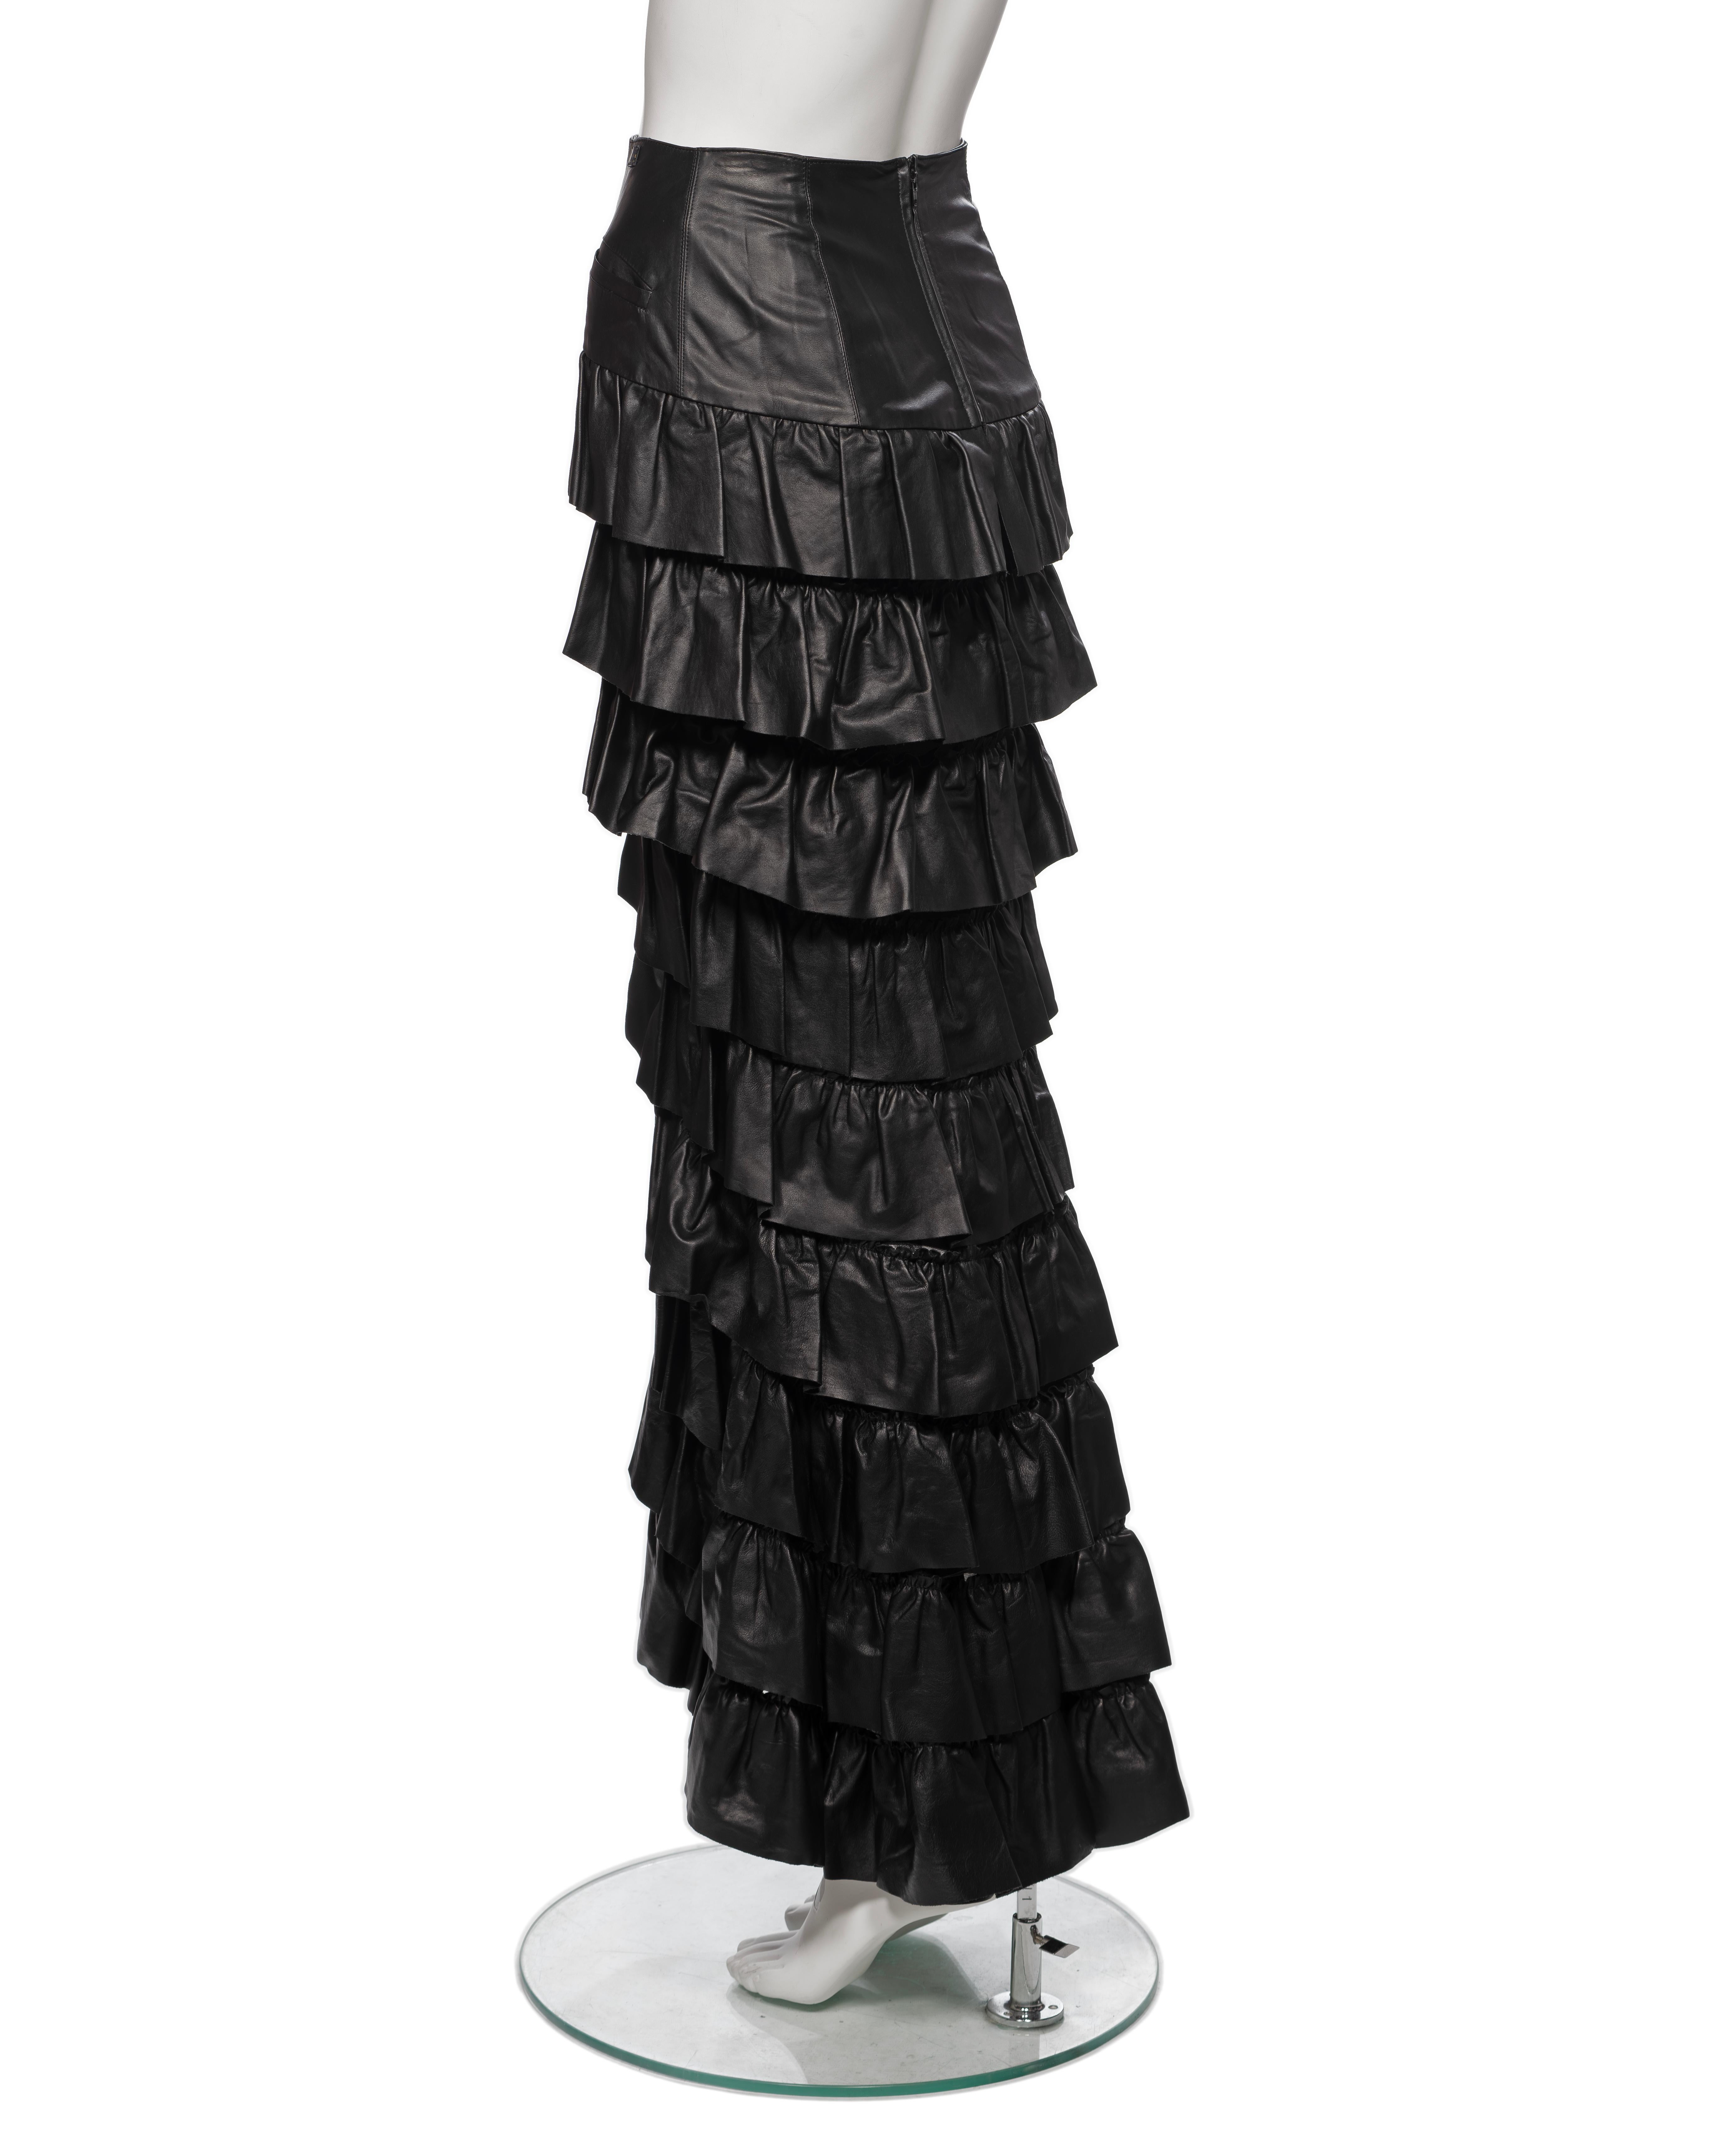 Chanel by Karl Lagerfeld Black Leather Tiered Ruffled Maxi Skirt, FW 2001 For Sale 8